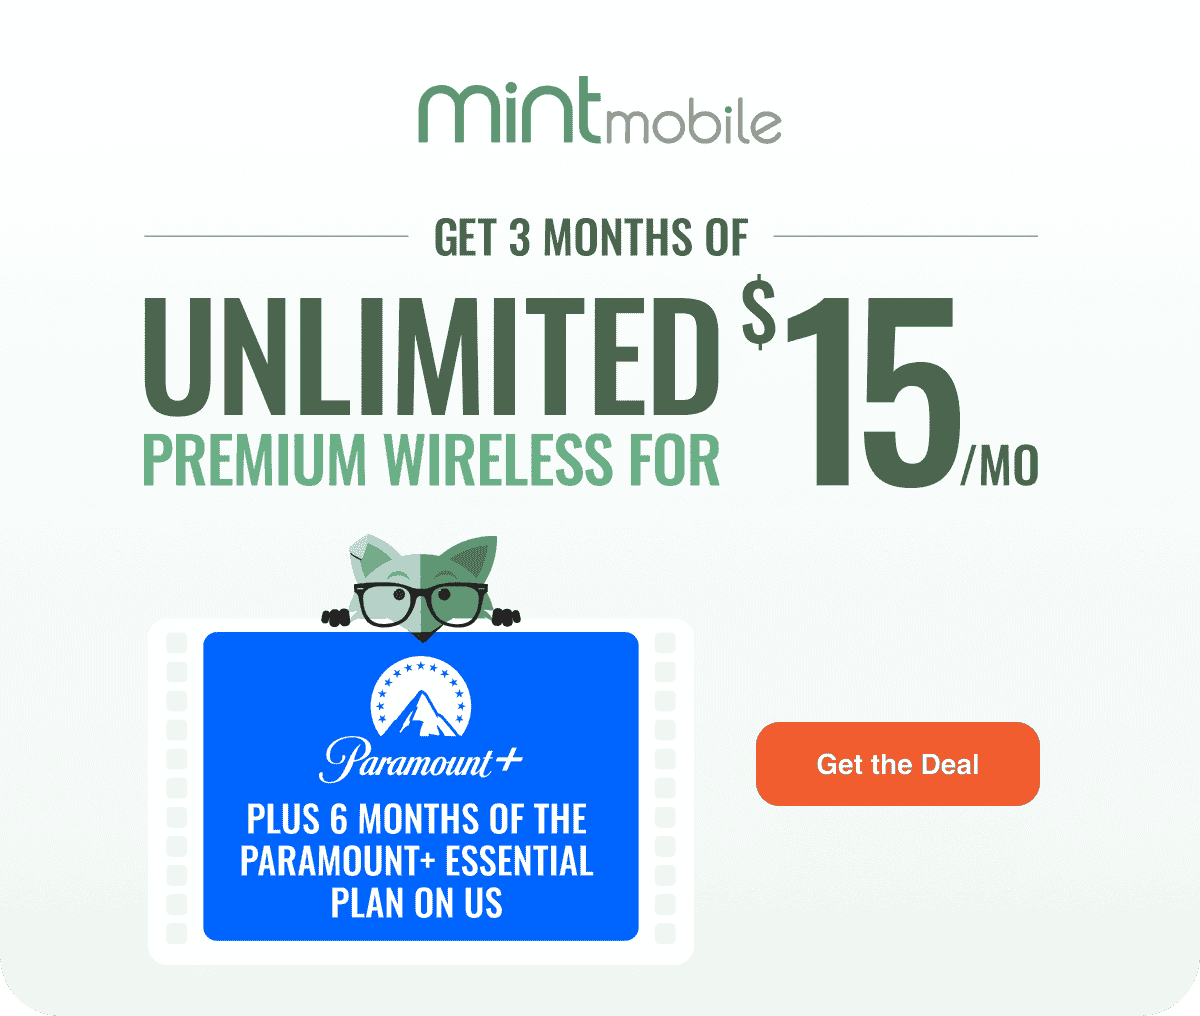 Get 3 Months of Unlimited Premium Wireless for \\$15/mo